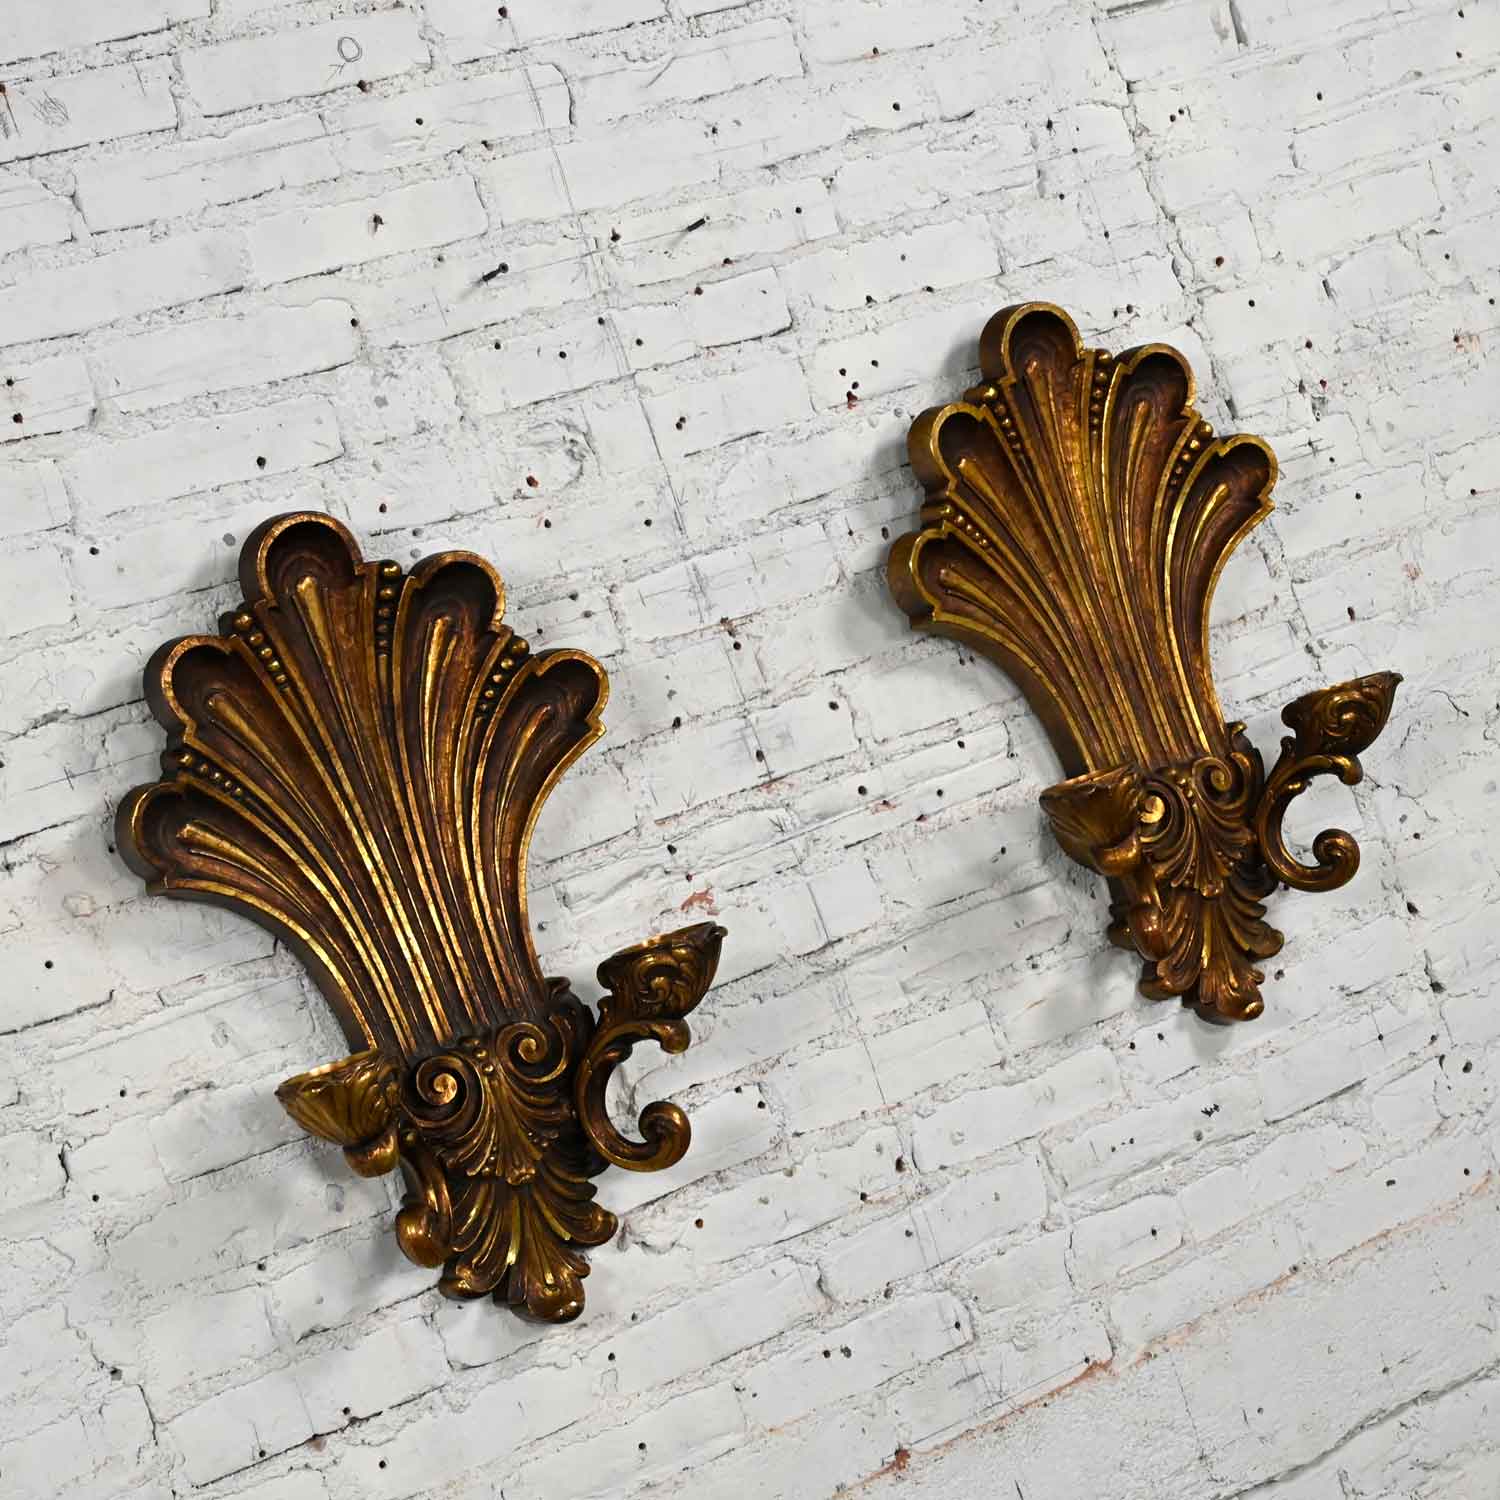 Vintage Gilded Syroco Hollywood Regency Double Candle Wall Sconces a Pair